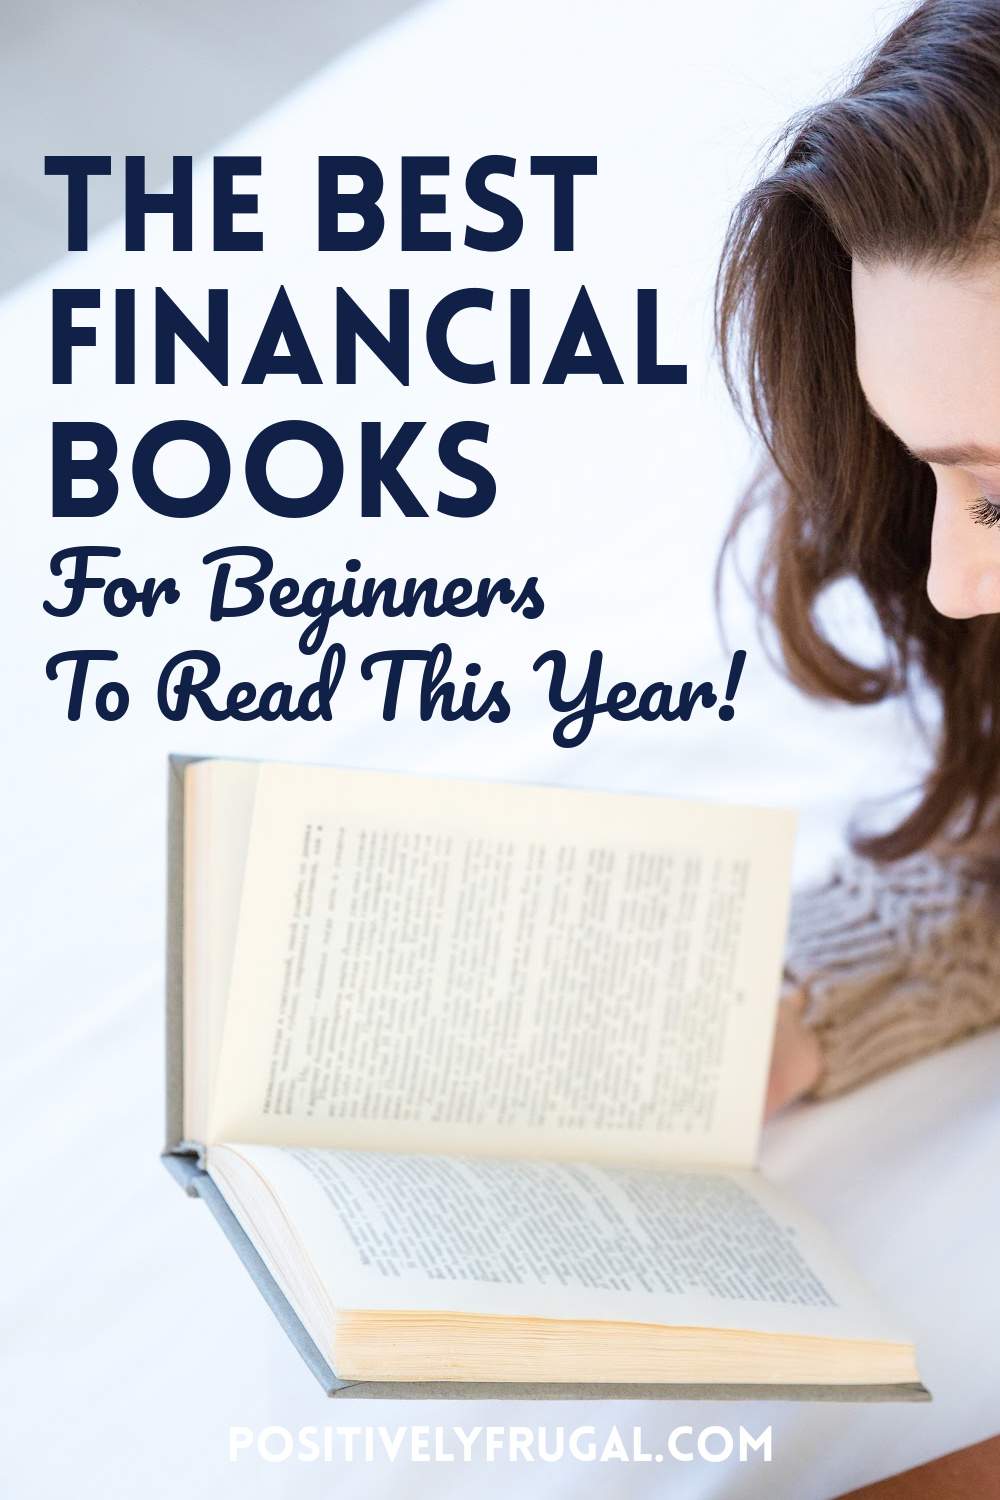 The Best Financial Books for Beginners to Read this Year by PositivelyFrugal.com